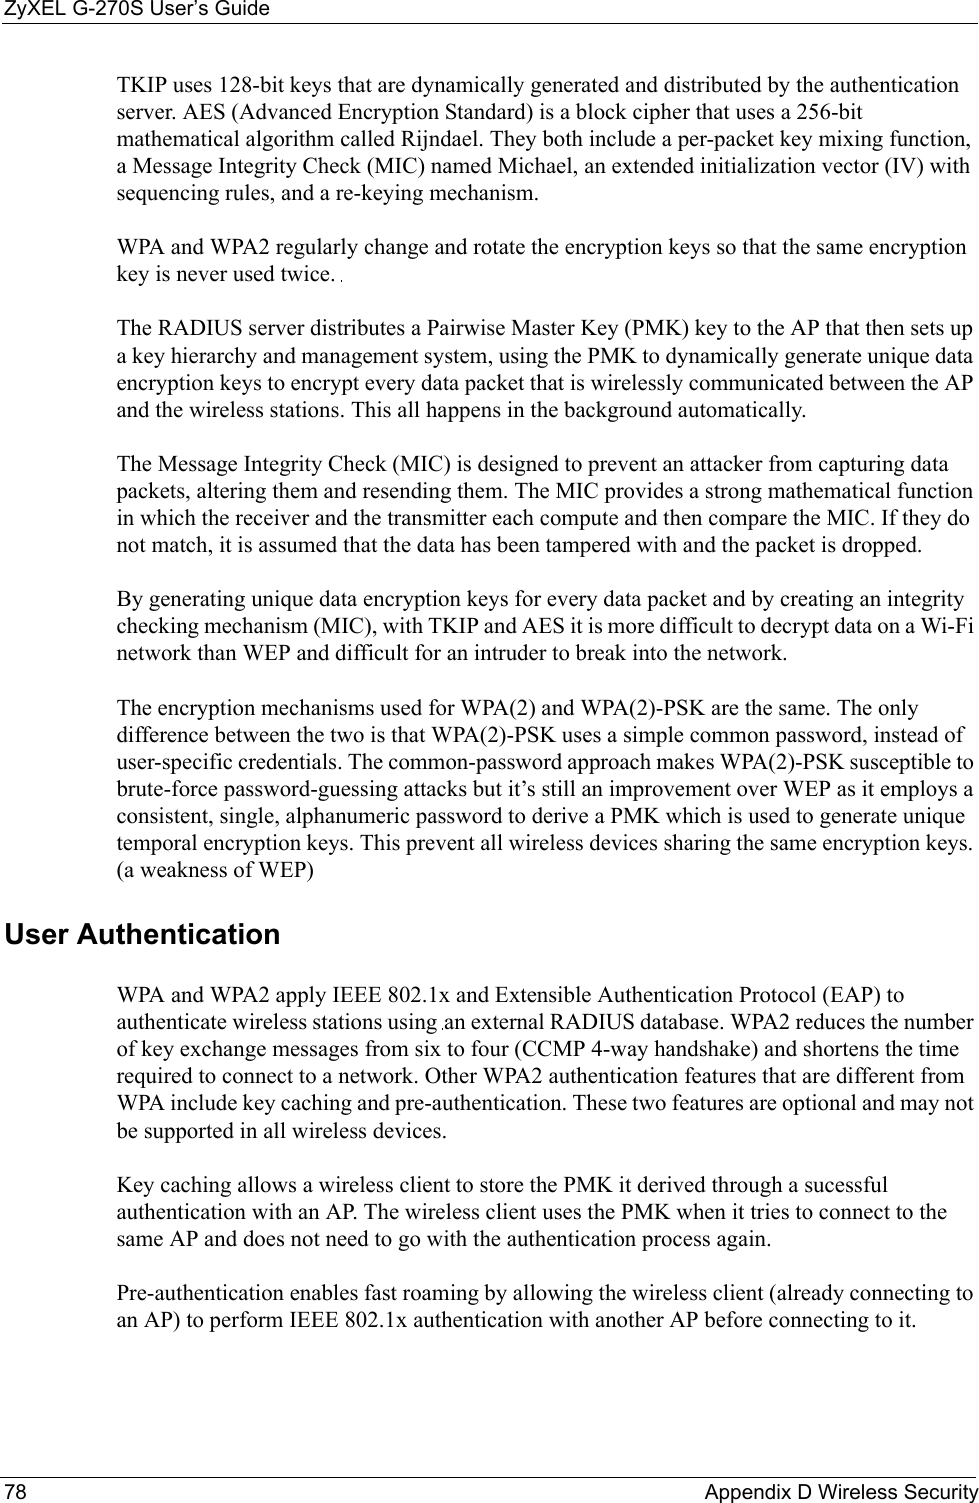 ZyXEL G-270S User’s Guide78 Appendix D Wireless SecurityTKIP uses 128-bit keys that are dynamically generated and distributed by the authentication server. AES (Advanced Encryption Standard) is a block cipher that uses a 256-bit mathematical algorithm called Rijndael. They both include a per-packet key mixing function, a Message Integrity Check (MIC) named Michael, an extended initialization vector (IV) with sequencing rules, and a re-keying mechanism.WPA and WPA2 regularly change and rotate the encryption keys so that the same encryption key is never used twice. The RADIUS server distributes a Pairwise Master Key (PMK) key to the AP that then sets up a key hierarchy and management system, using the PMK to dynamically generate unique data encryption keys to encrypt every data packet that is wirelessly communicated between the AP and the wireless stations. This all happens in the background automatically.The Message Integrity Check (MIC) is designed to prevent an attacker from capturing data packets, altering them and resending them. The MIC provides a strong mathematical function in which the receiver and the transmitter each compute and then compare the MIC. If they do not match, it is assumed that the data has been tampered with and the packet is dropped. By generating unique data encryption keys for every data packet and by creating an integrity checking mechanism (MIC), with TKIP and AES it is more difficult to decrypt data on a Wi-Fi network than WEP and difficult for an intruder to break into the network. The encryption mechanisms used for WPA(2) and WPA(2)-PSK are the same. The only difference between the two is that WPA(2)-PSK uses a simple common password, instead of user-specific credentials. The common-password approach makes WPA(2)-PSK susceptible to brute-force password-guessing attacks but it’s still an improvement over WEP as it employs a consistent, single, alphanumeric password to derive a PMK which is used to generate unique temporal encryption keys. This prevent all wireless devices sharing the same encryption keys. (a weakness of WEP)User Authentication WPA and WPA2 apply IEEE 802.1x and Extensible Authentication Protocol (EAP) to authenticate wireless stations using an external RADIUS database. WPA2 reduces the number of key exchange messages from six to four (CCMP 4-way handshake) and shortens the time required to connect to a network. Other WPA2 authentication features that are different from WPA include key caching and pre-authentication. These two features are optional and may not be supported in all wireless devices.Key caching allows a wireless client to store the PMK it derived through a sucessful authentication with an AP. The wireless client uses the PMK when it tries to connect to the same AP and does not need to go with the authentication process again.Pre-authentication enables fast roaming by allowing the wireless client (already connecting to an AP) to perform IEEE 802.1x authentication with another AP before connecting to it.